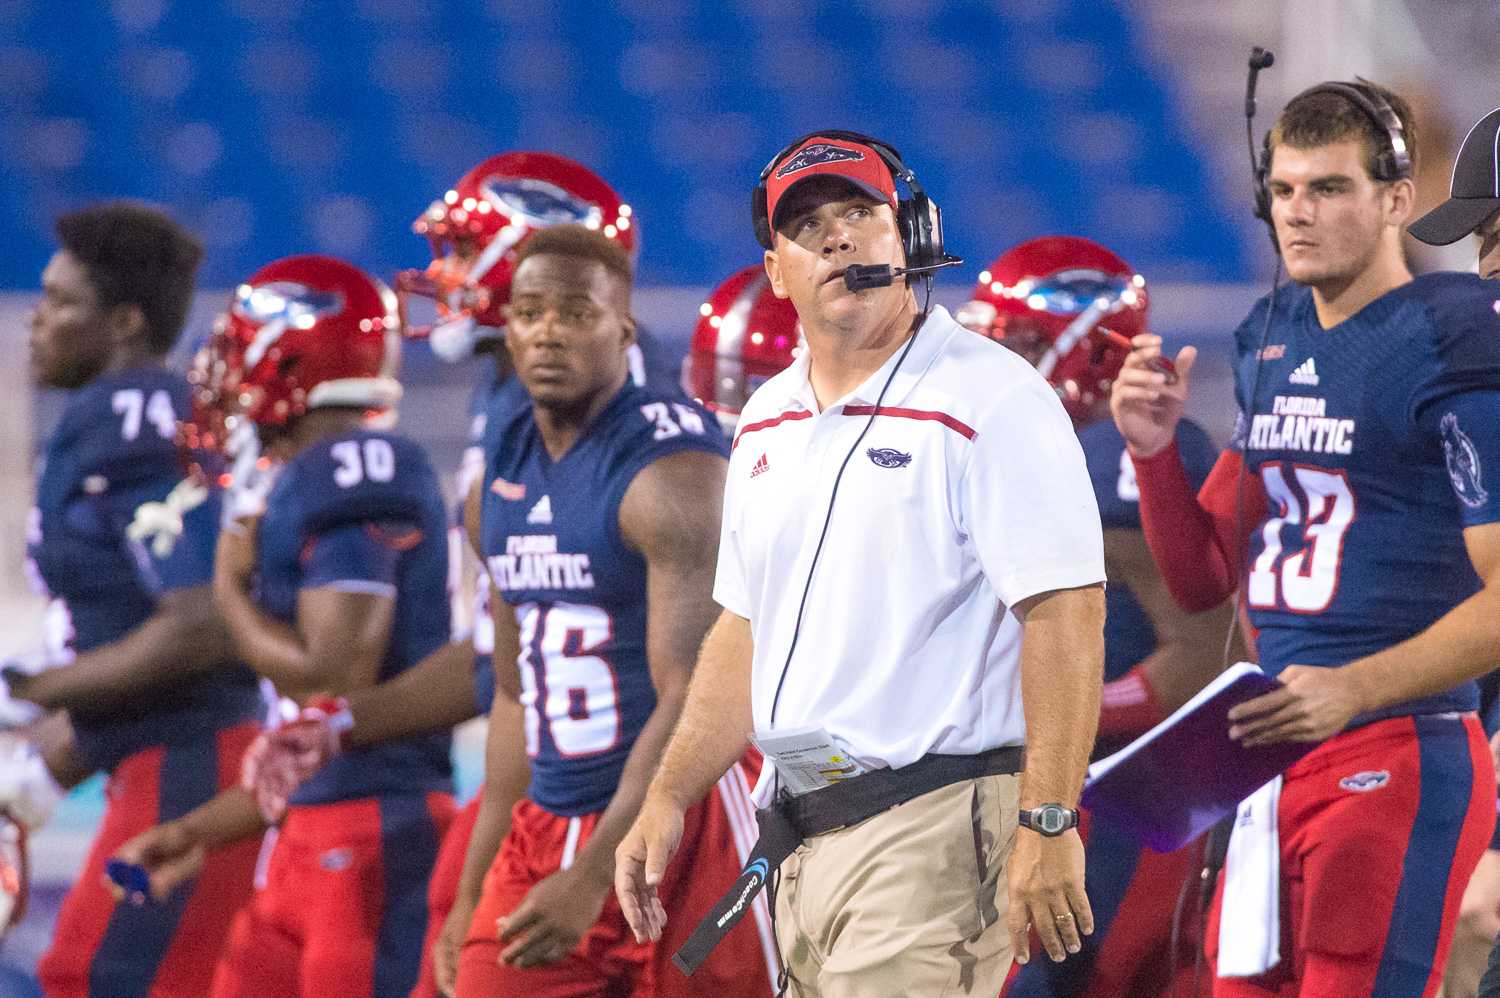  FAU head coach Charlie Partridge looks up at the scoreboard, with 2:44 left in the fourth quarter during his team’s 27-26 loss to Rice. Max Jackson | Staff Photographer